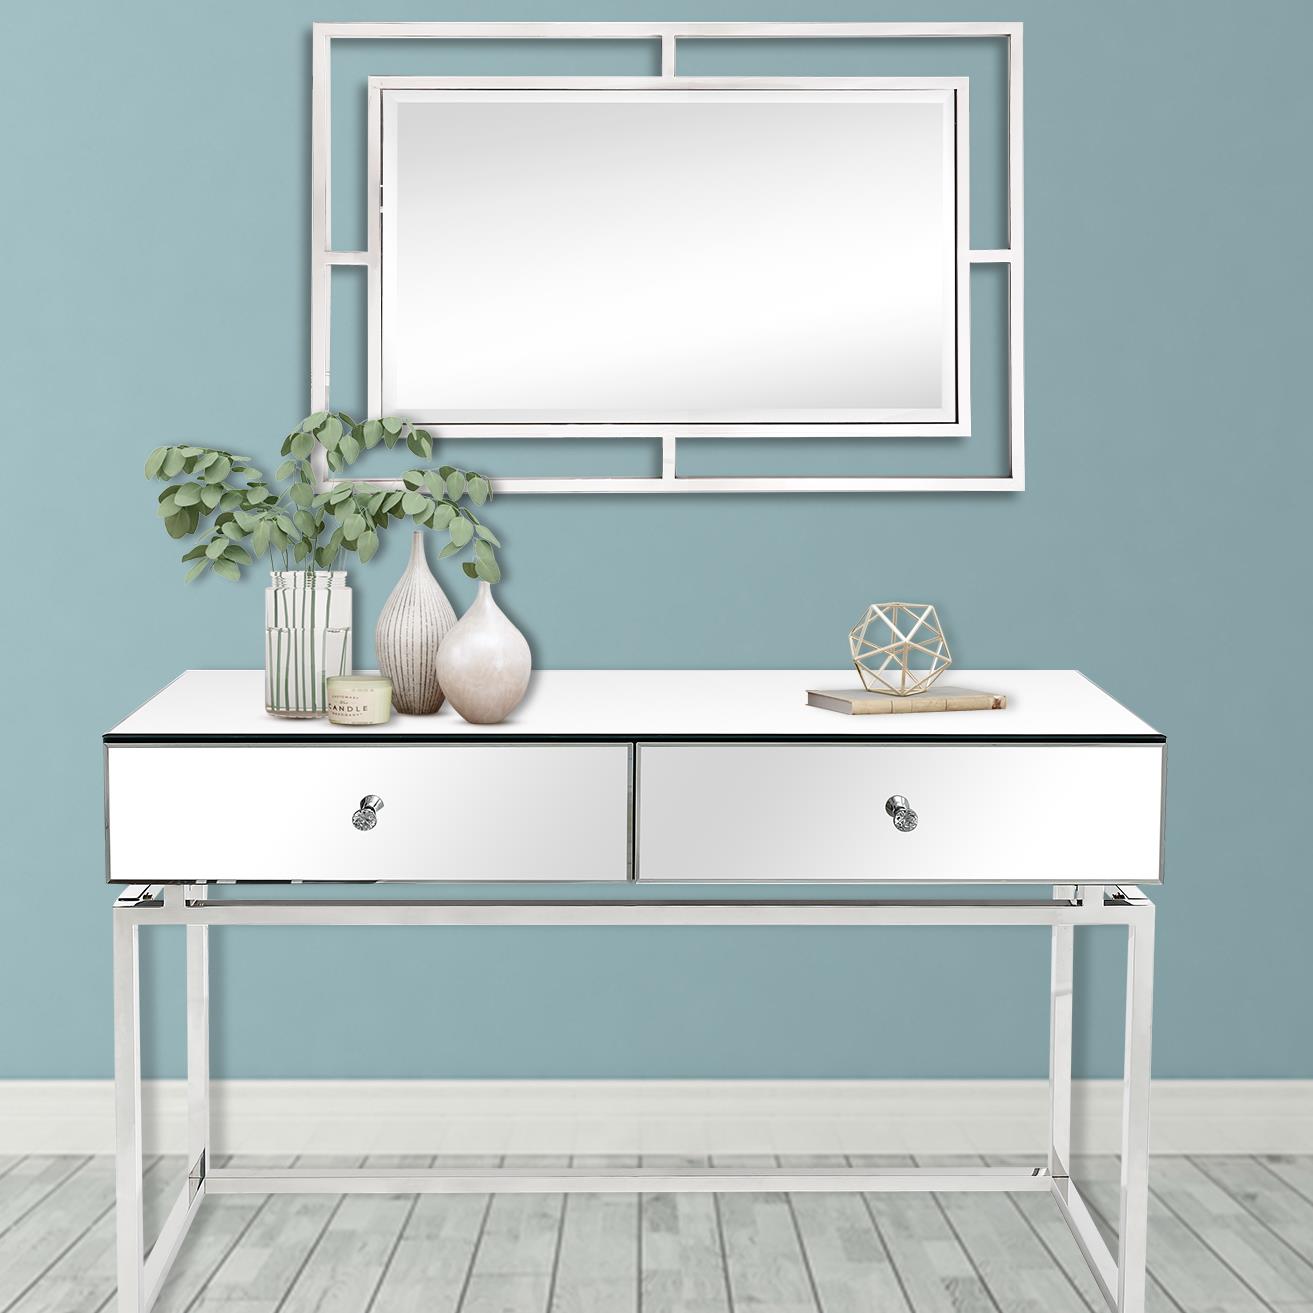 Addison Wall Mirror and Console Table